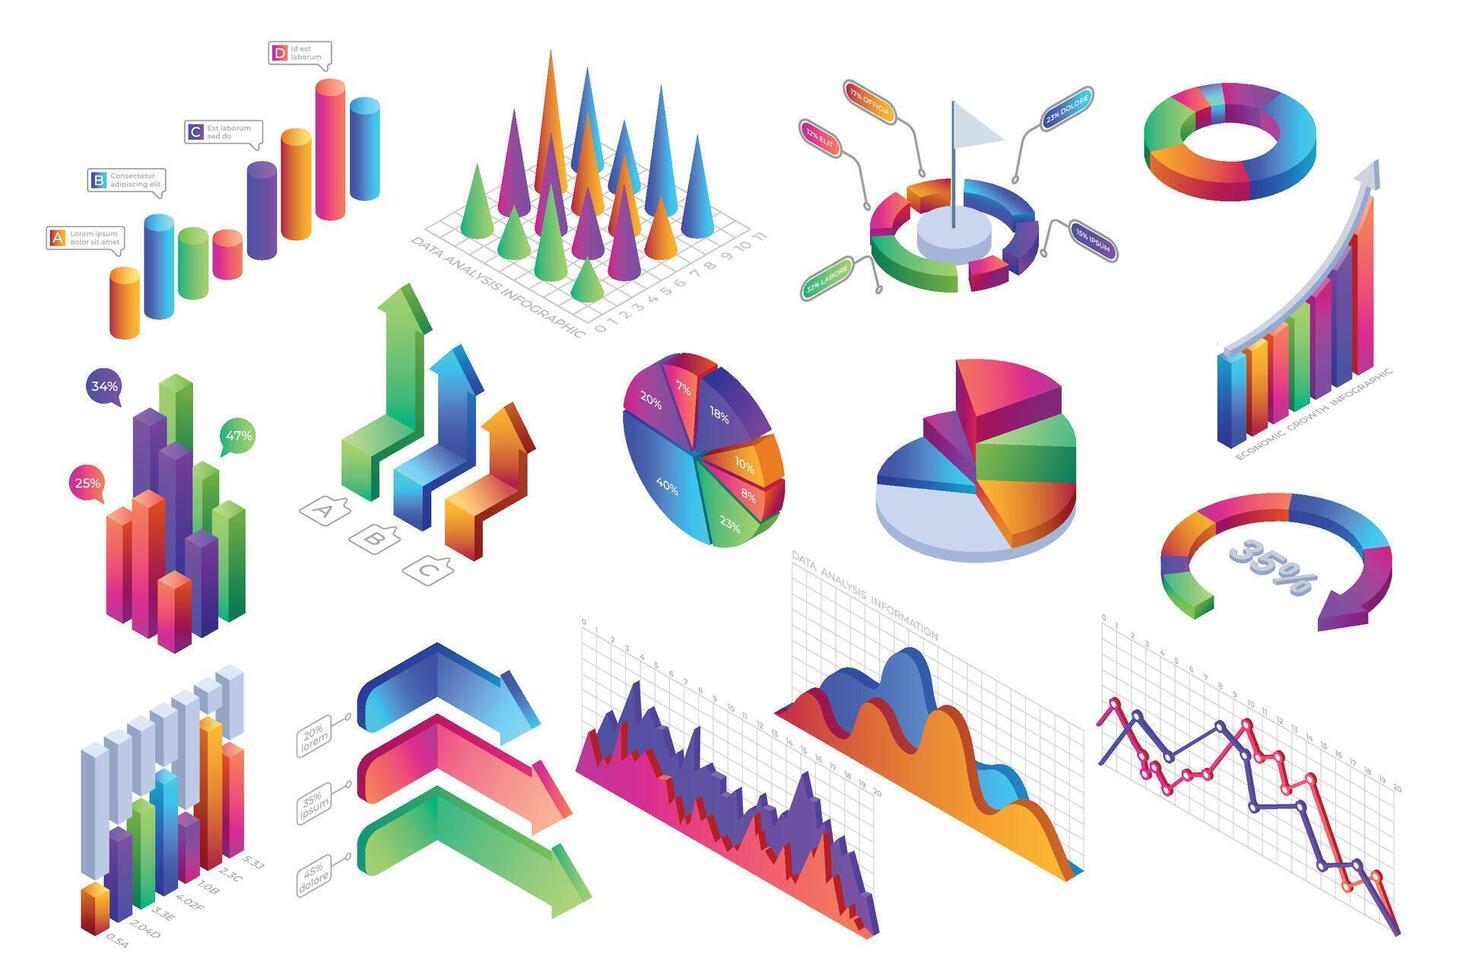 Isometric infographic. 3D diagrams, graphs, progress bars and charts, business and finance statistic and analytic. Vector presentation layout with abstract shapes